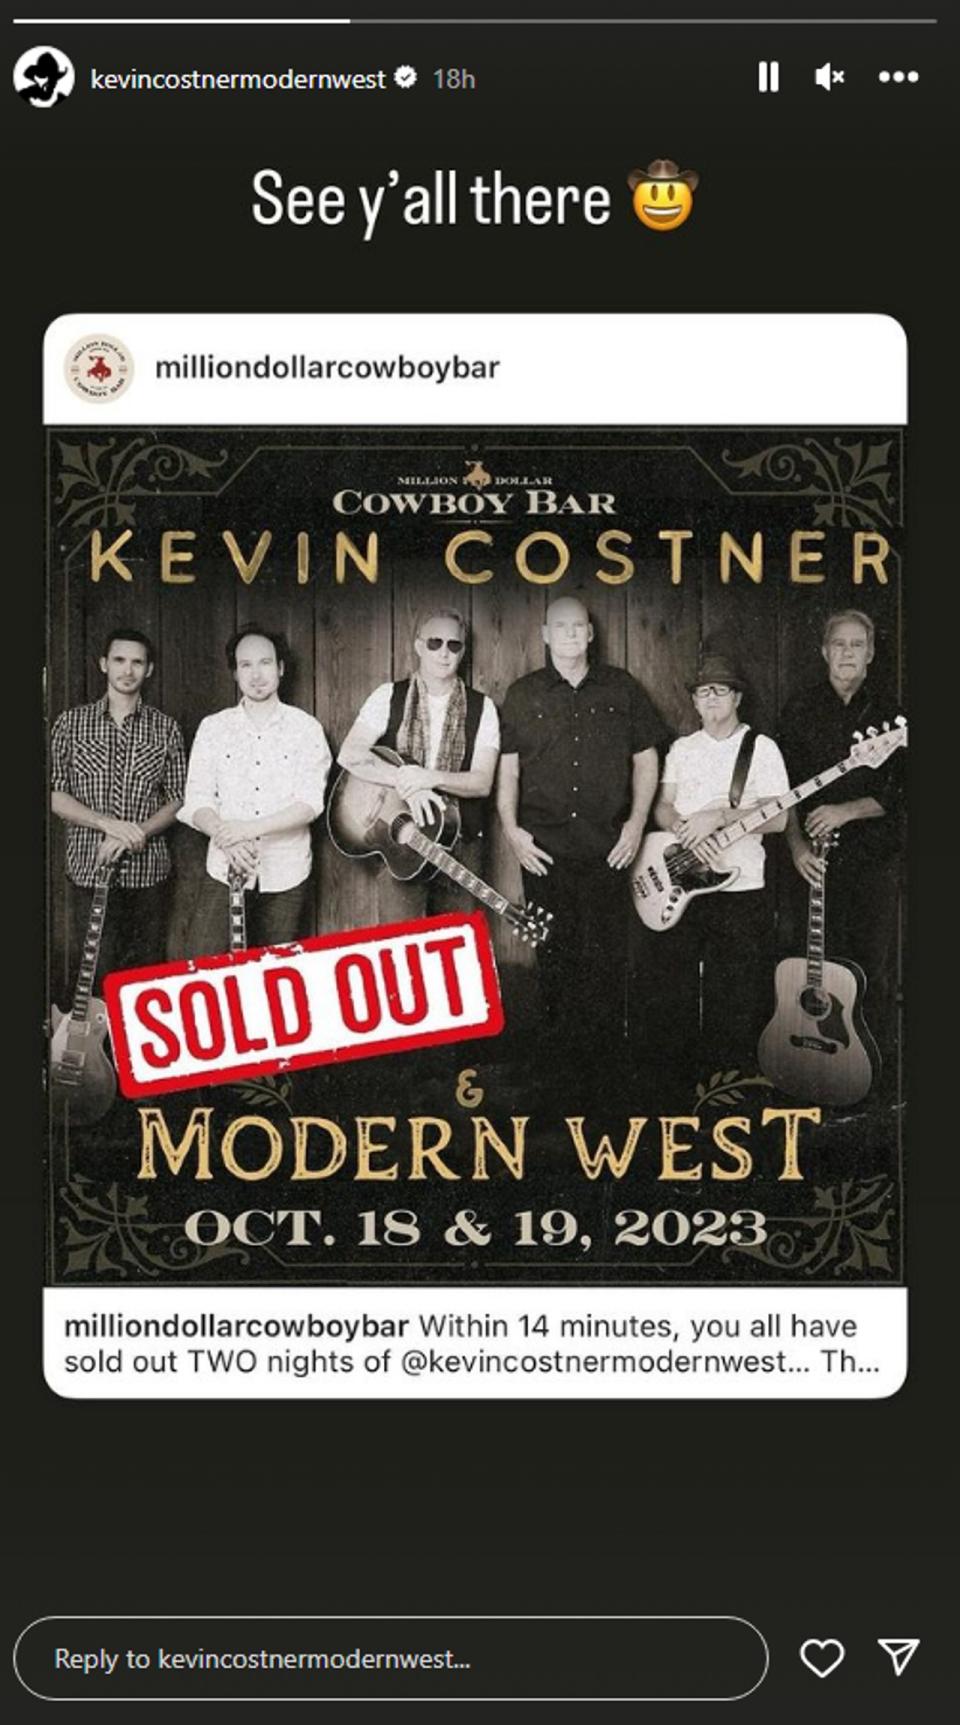 Kevin Costner's Instagram story post  about his band selling out a show. He wrote 